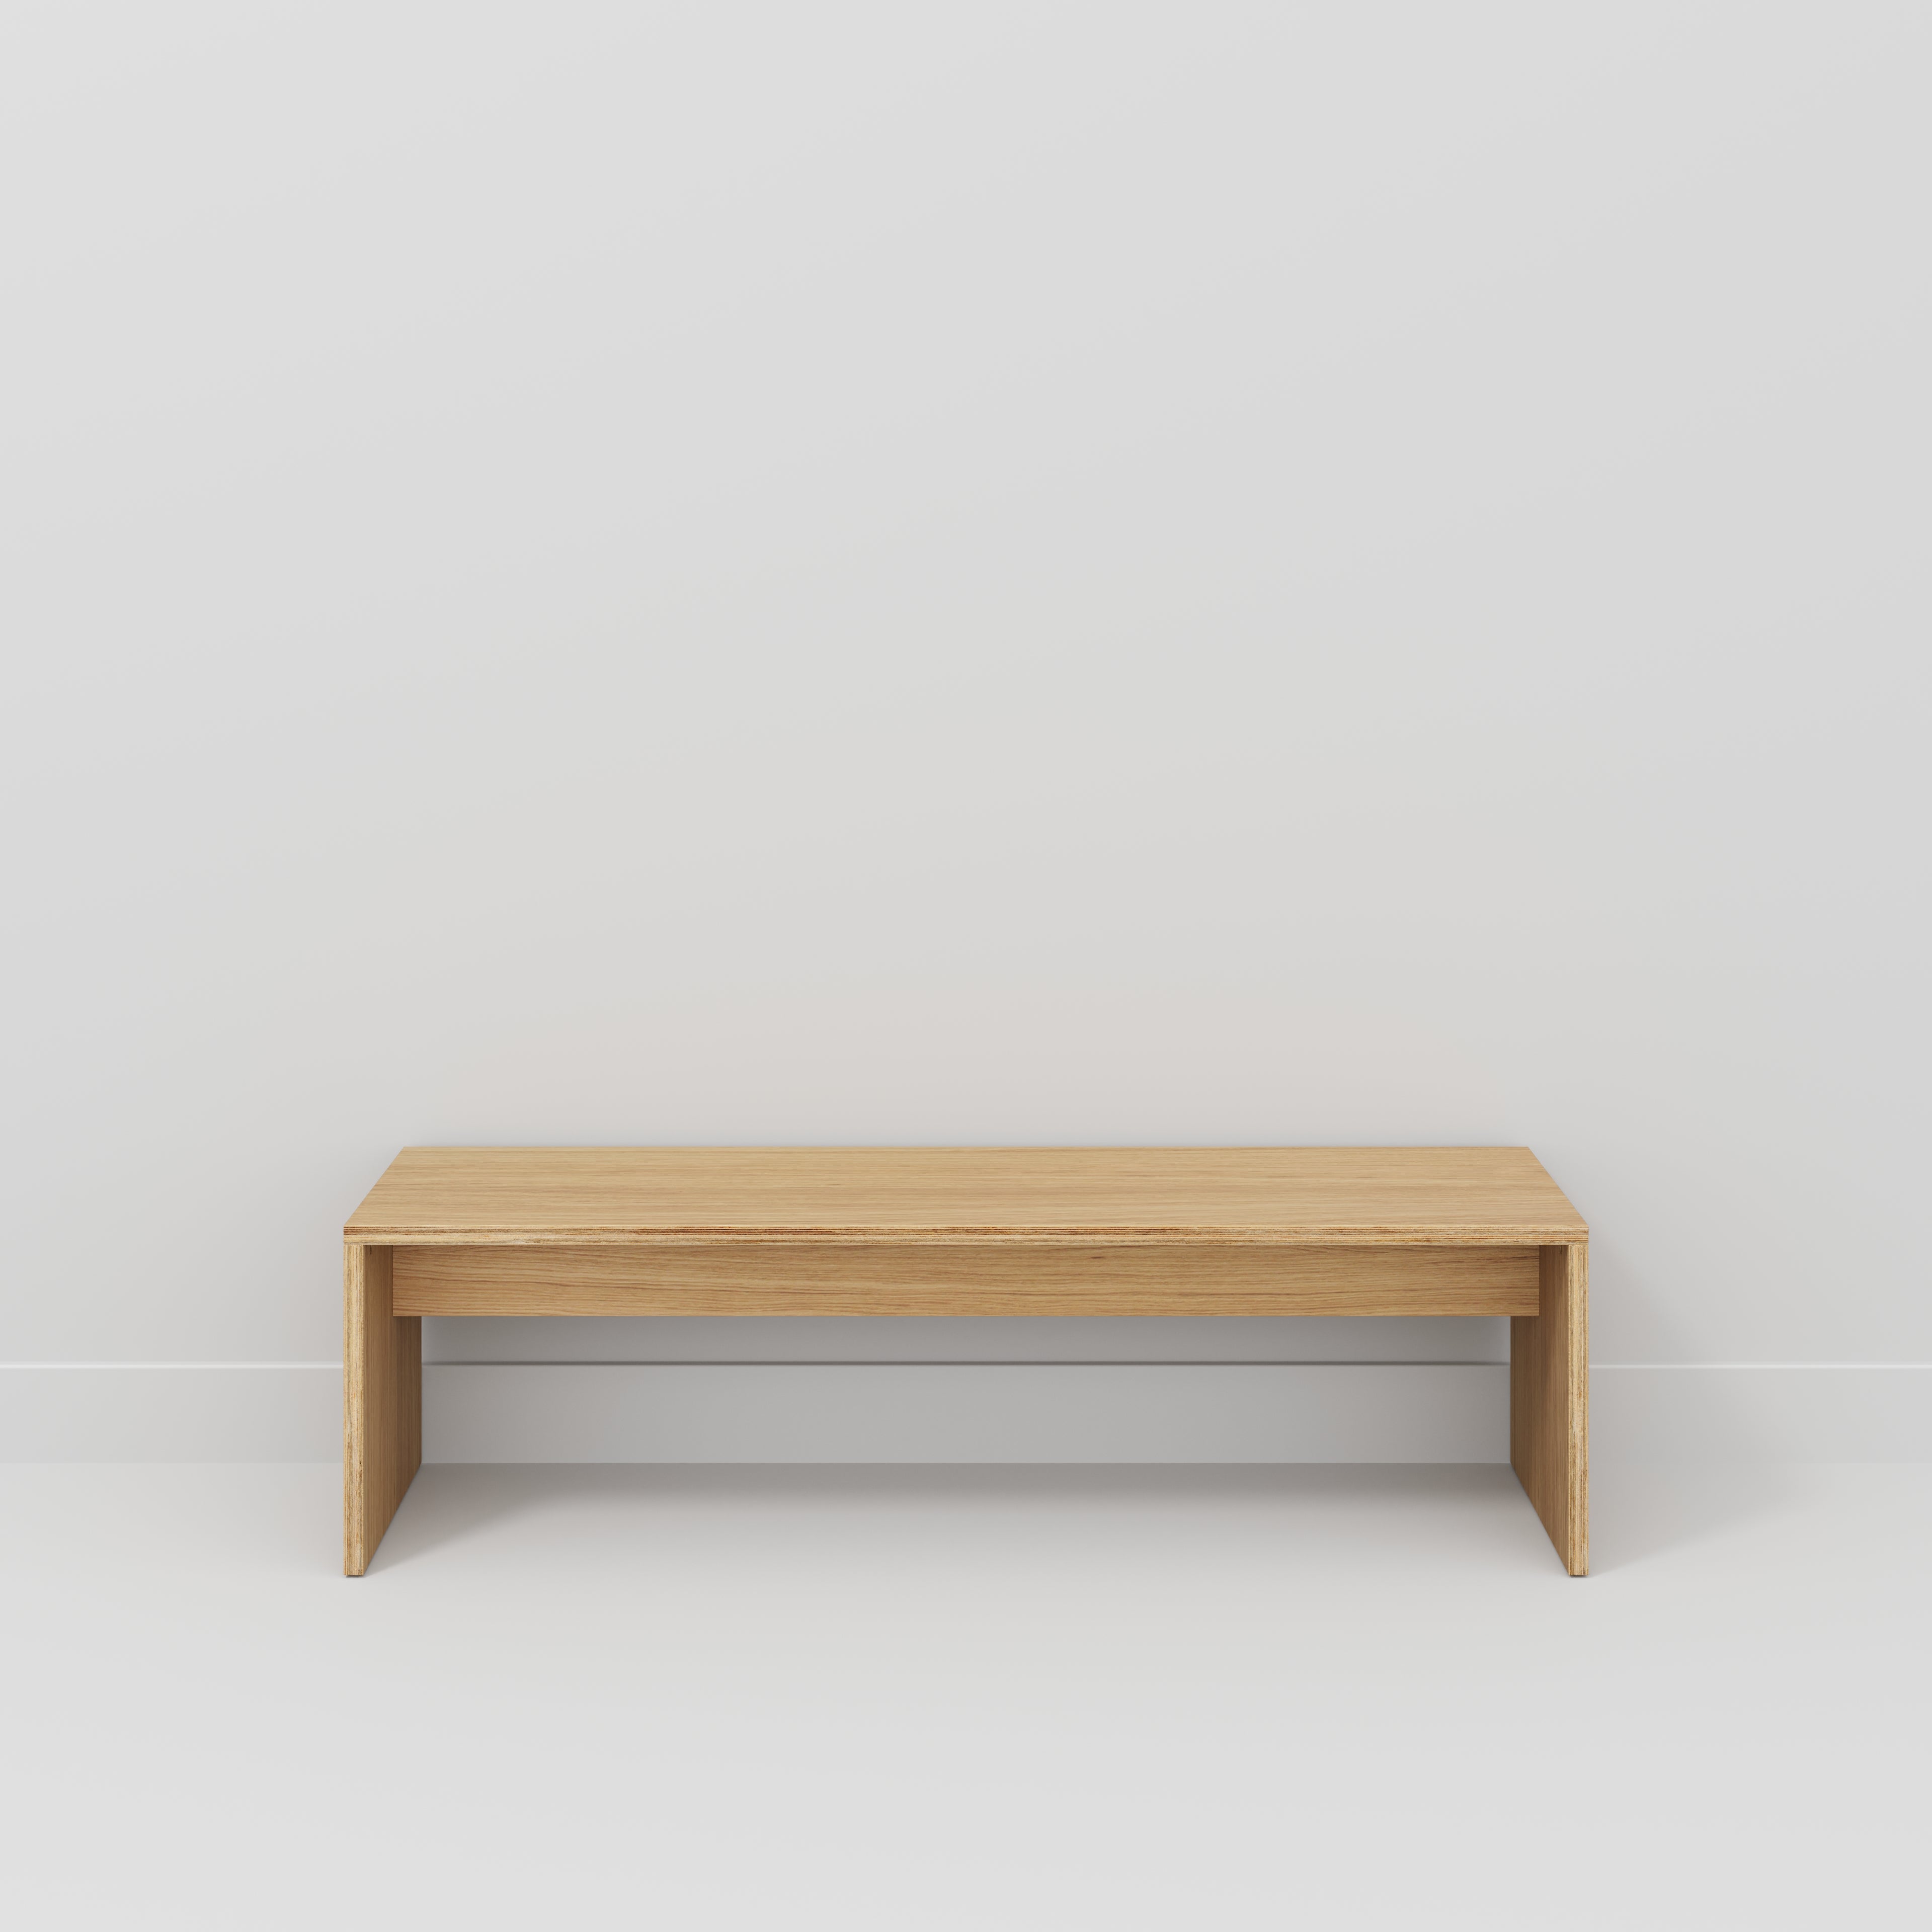 Bench Seat with Solid Sides - Plywood Oak - 1600(w) x 400(d)